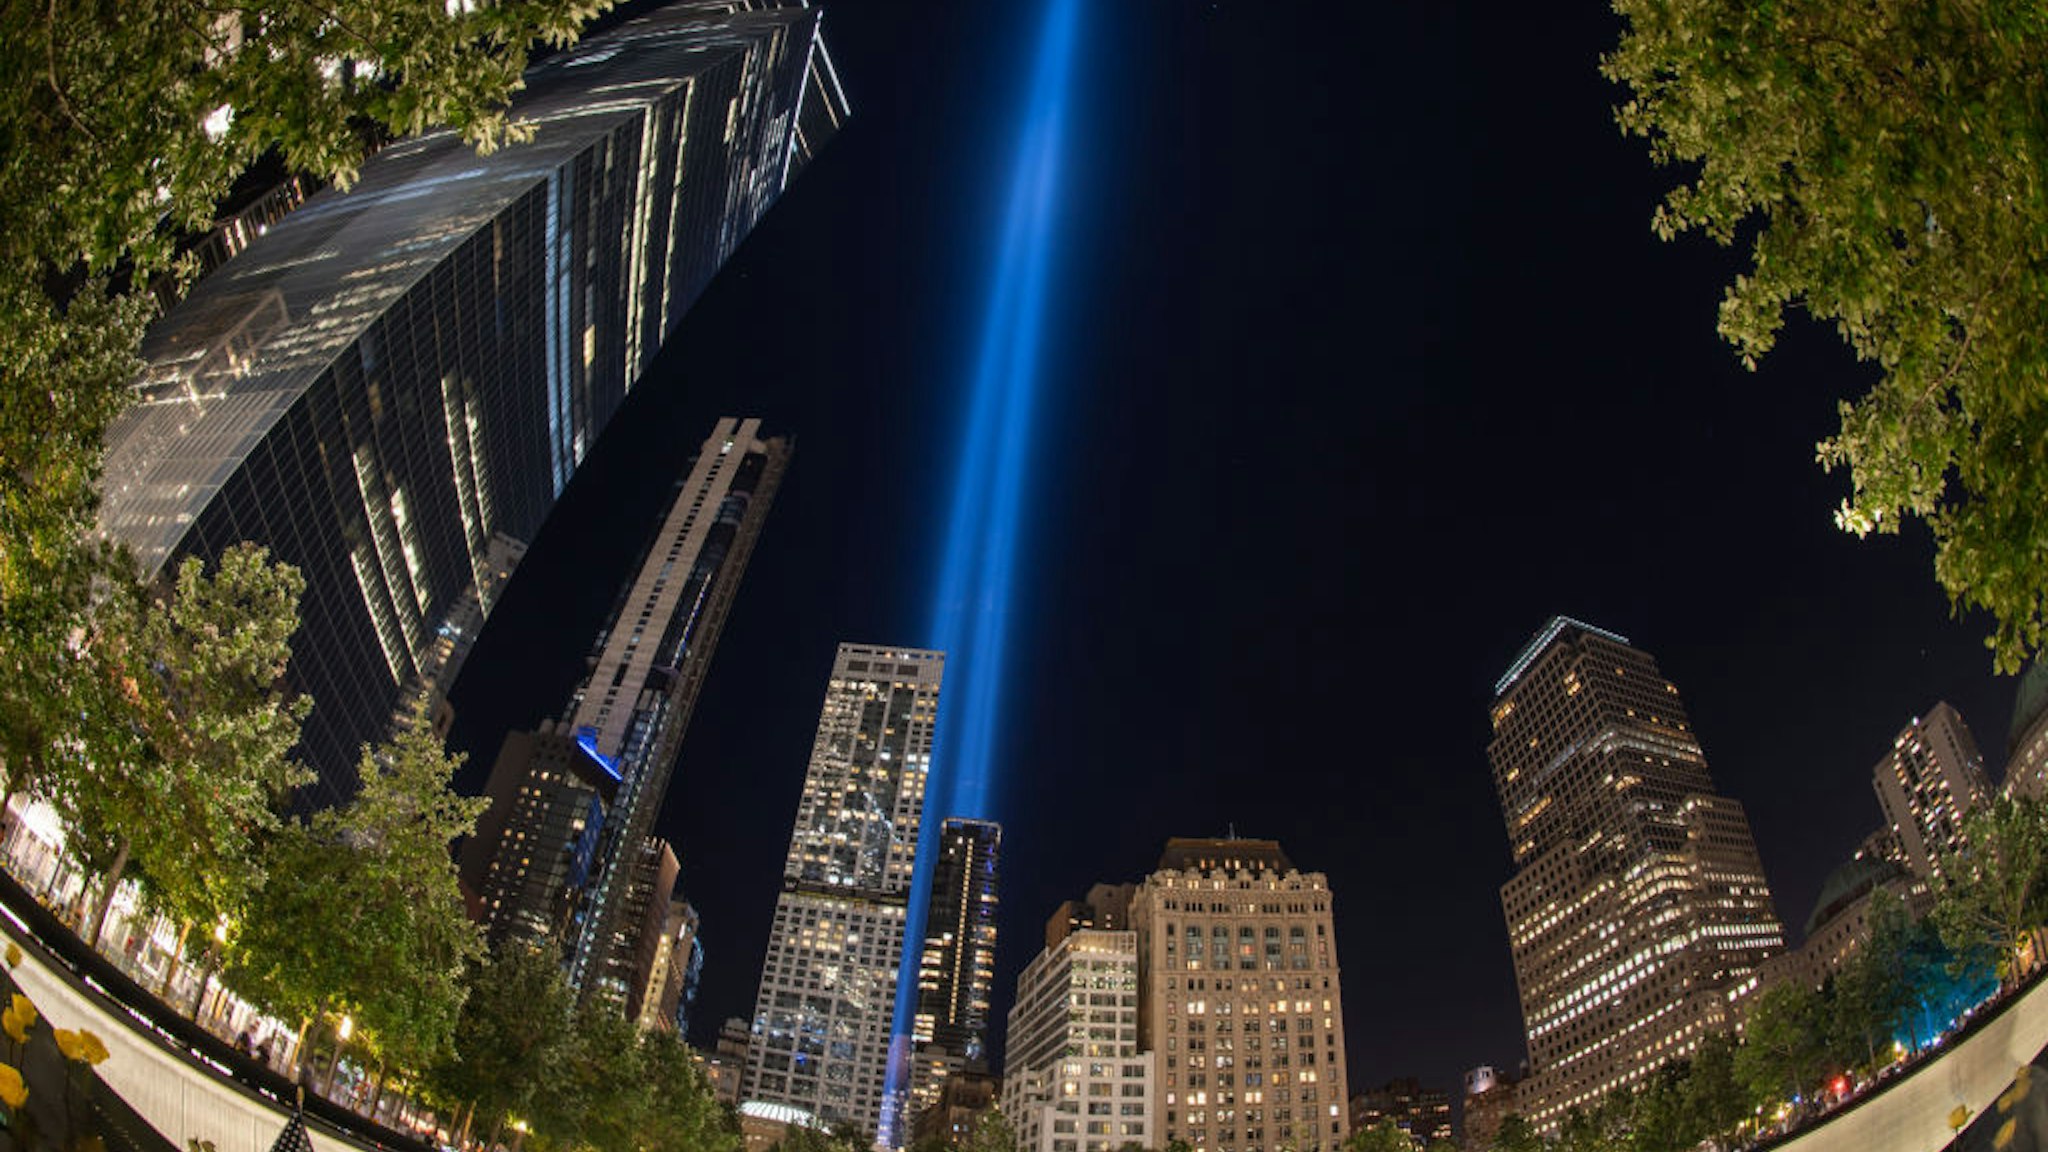 MANHATTAN, NEW YORK, UNITED STATES - 2020/09/11: (EDITORS NOTE: Image taken with fish eye lens) View of Tribute of Light illuminates skies above the south reflecting pool of the National September 11 Memorial and Museum on 19th anniversary of terror attack. The twin lights represent the Twin Towers which were destroyed during terror attack in 2001.